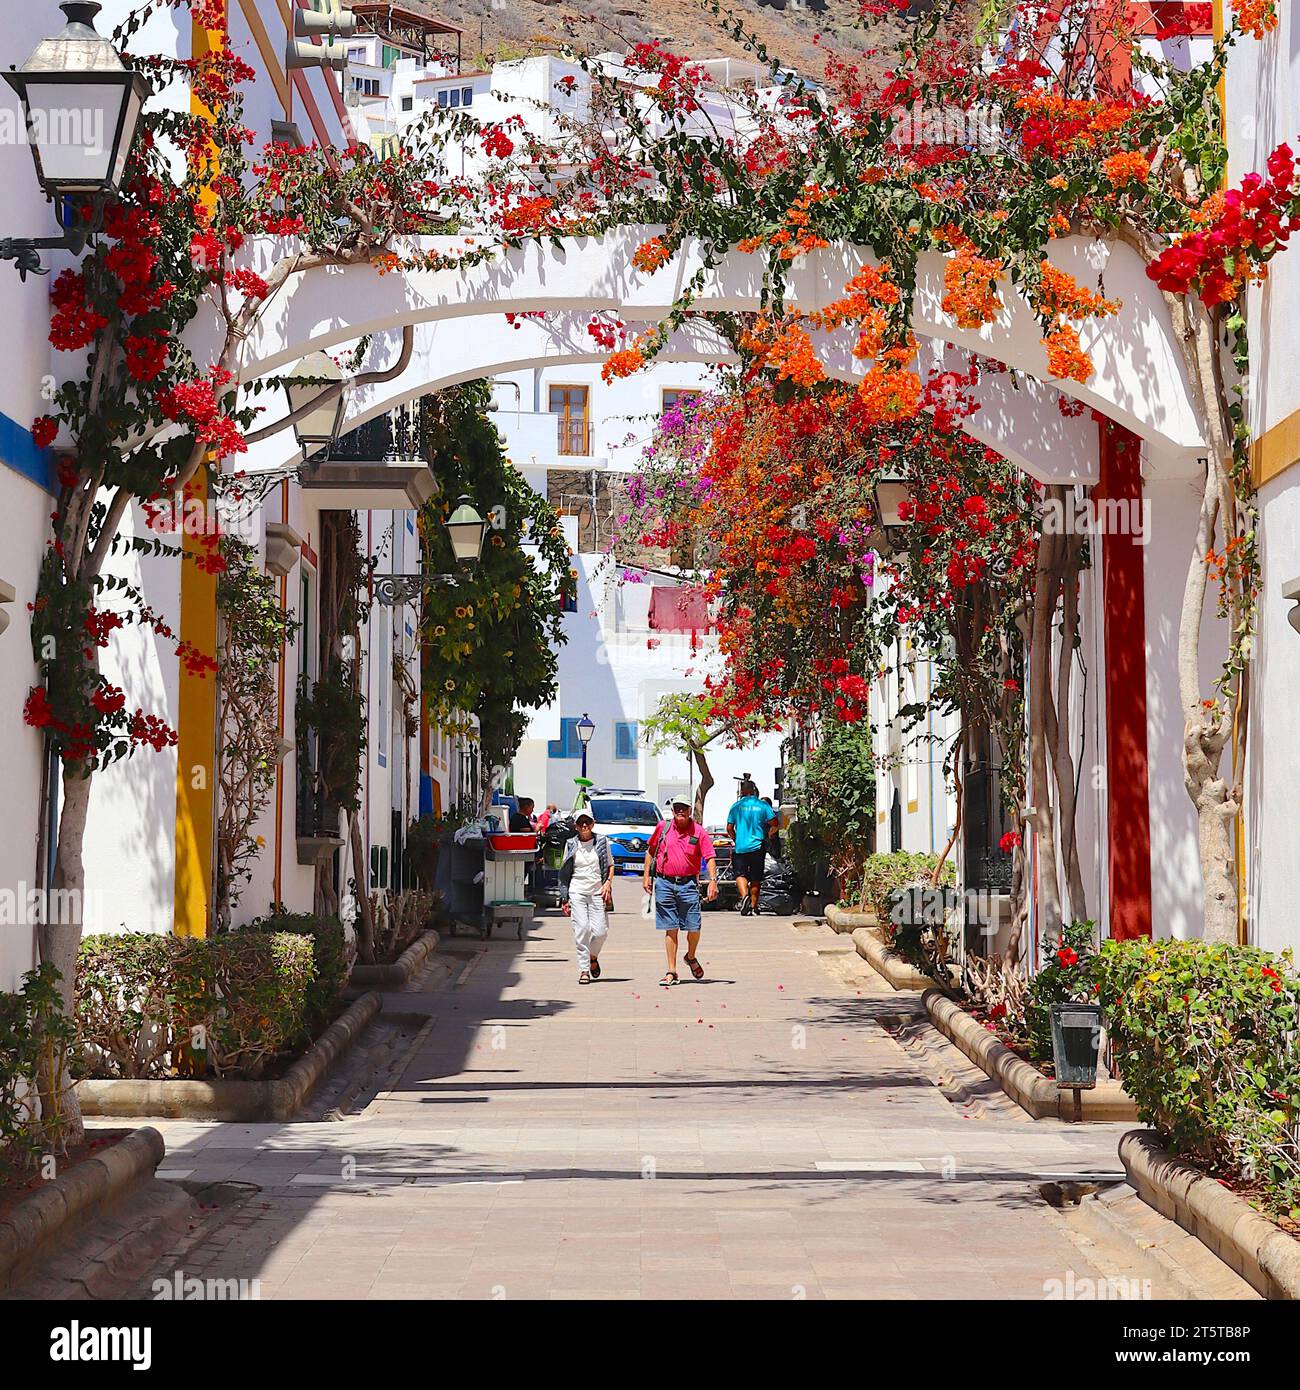 Cascading bougainvillea flowers in vivid red, magenta and orange, frame the streets of Playa de Mogan, Gran Canaria, where a couple of tourists walk, Stock Photo